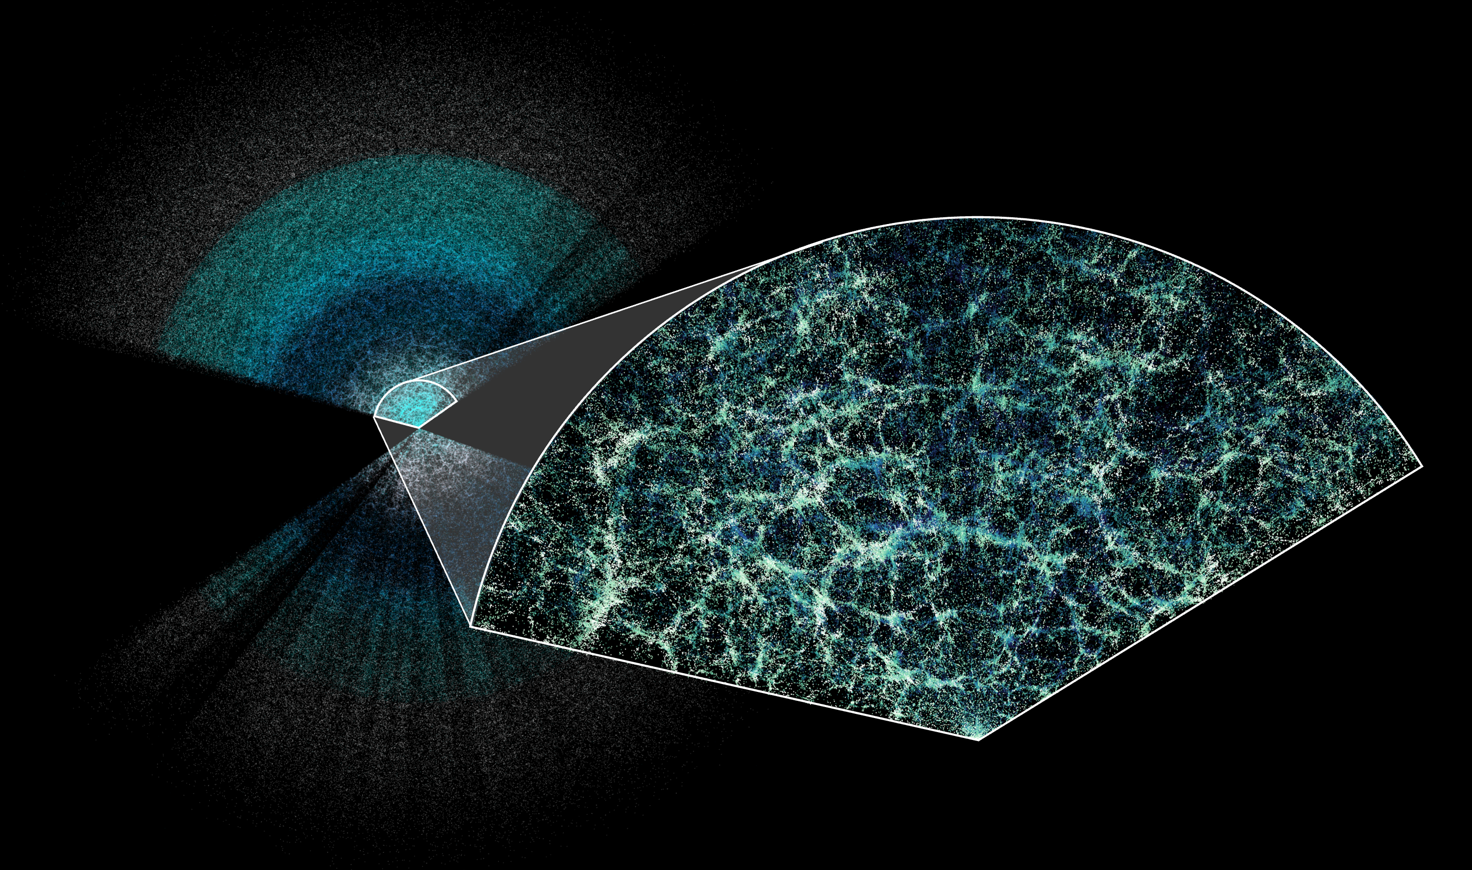 3D map of our universe to date with Earth at the center of this thin slice of the full map.